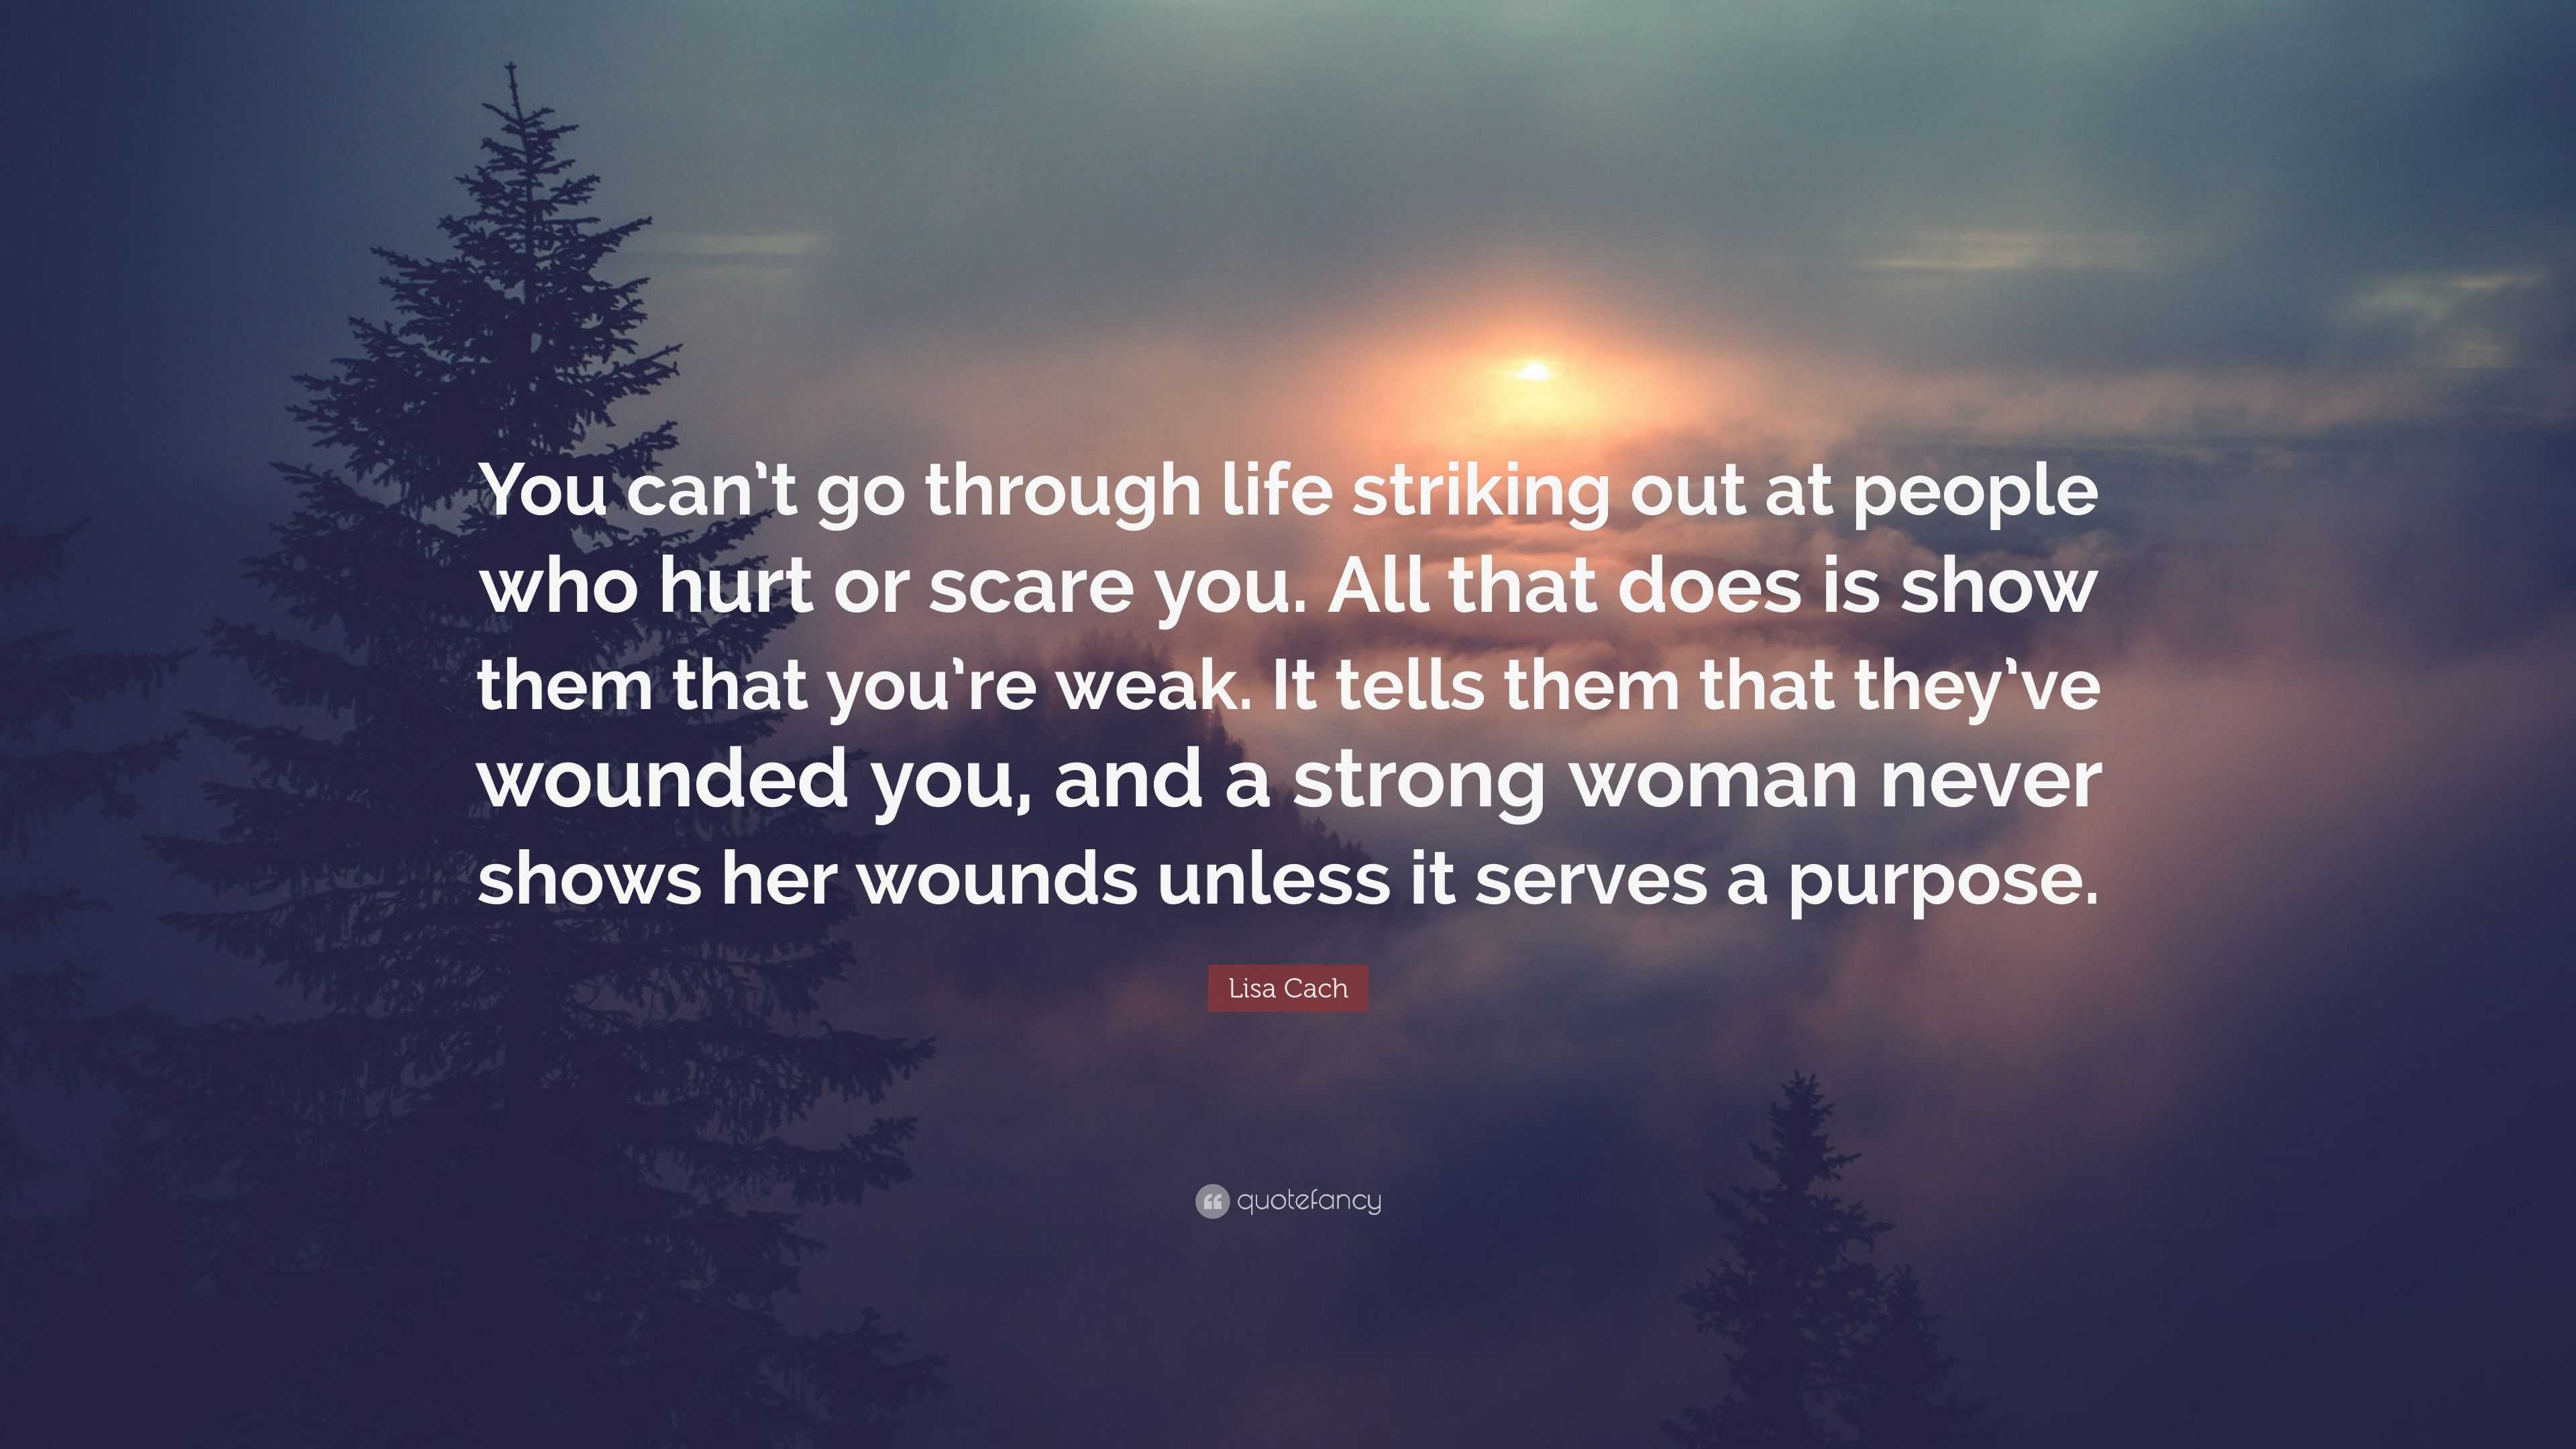 Lisa Cach Quote: “You can’t go through life striking out at people who ...